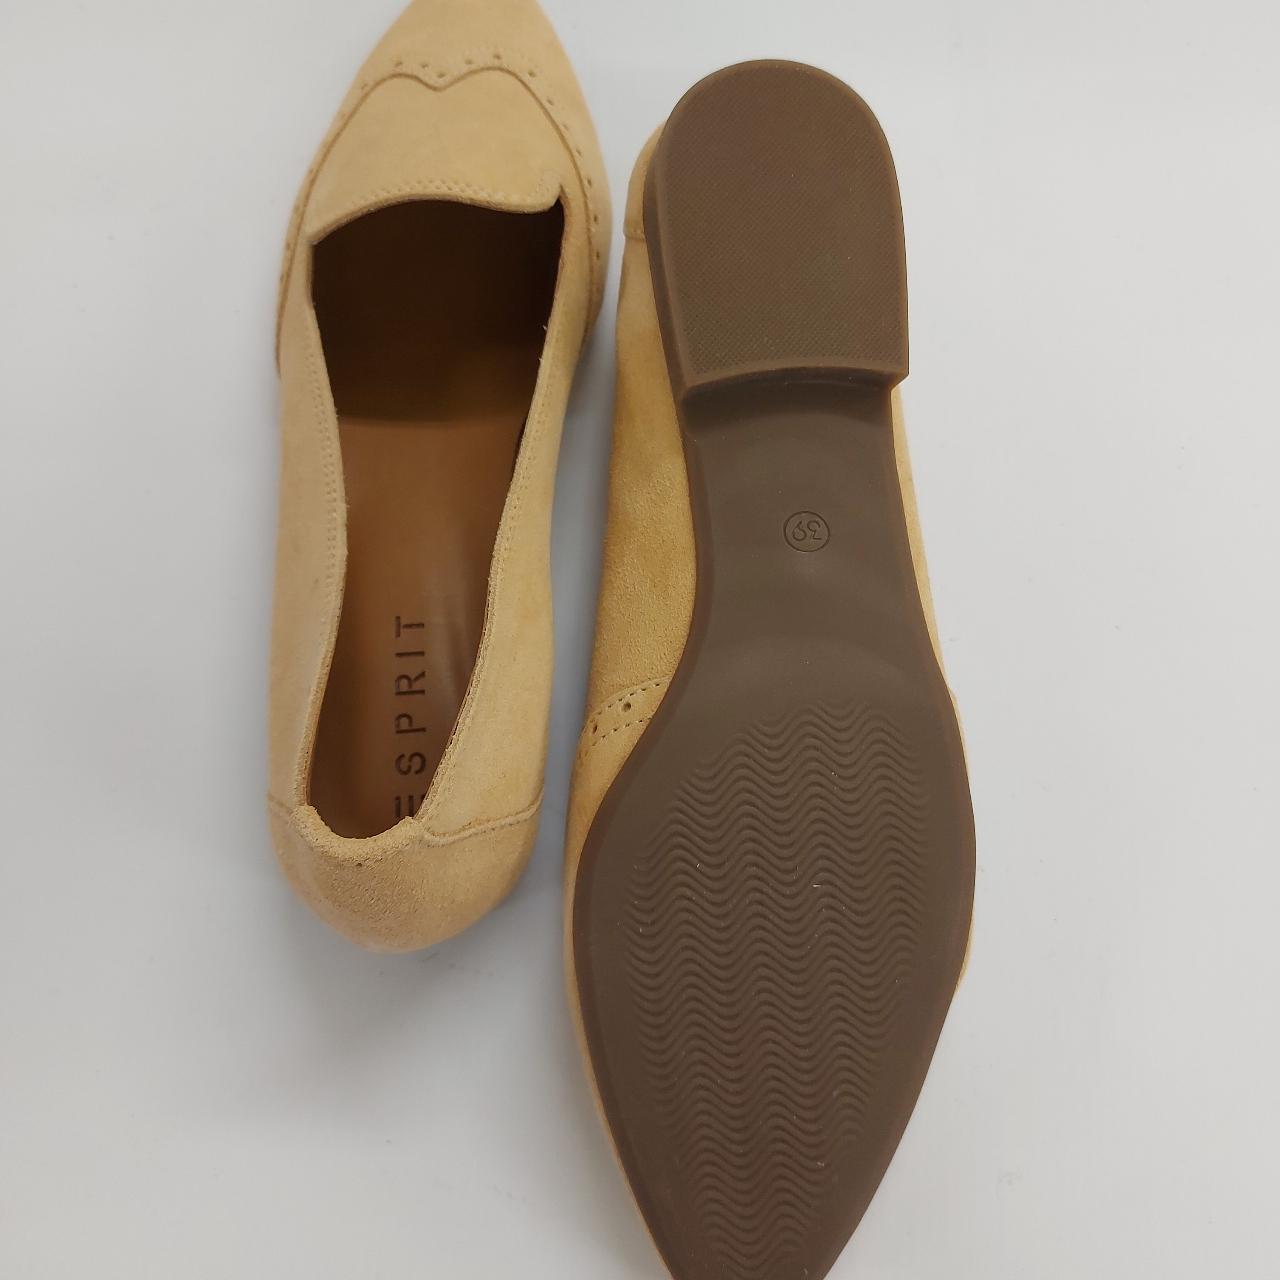 Product Image 4 - Espirit ladies Loafer
Beige suede
Brouge styling